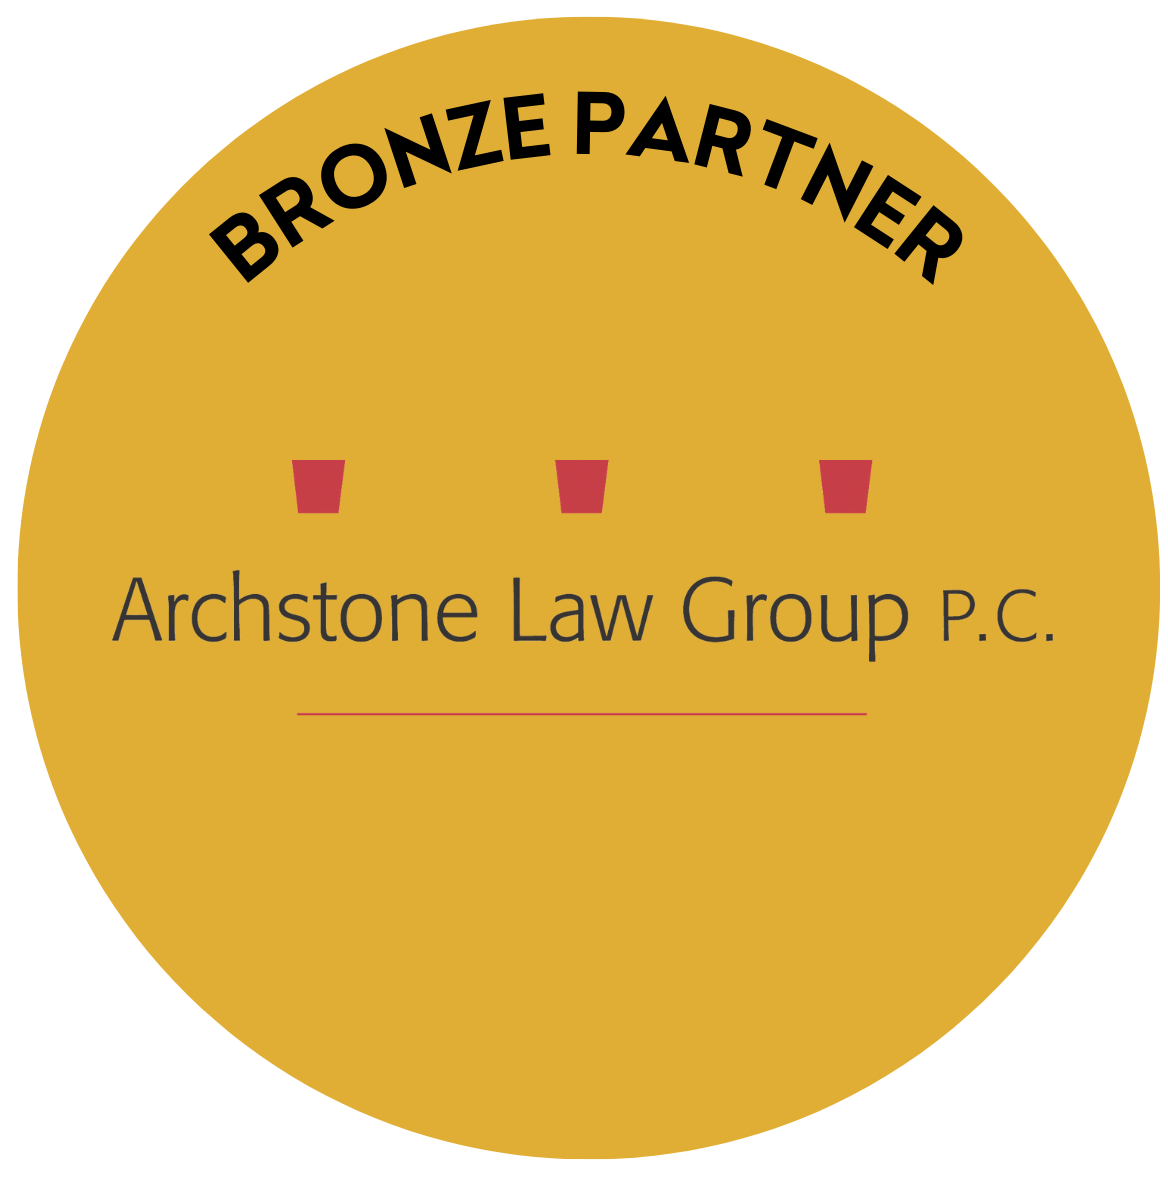 Archstone Law Group